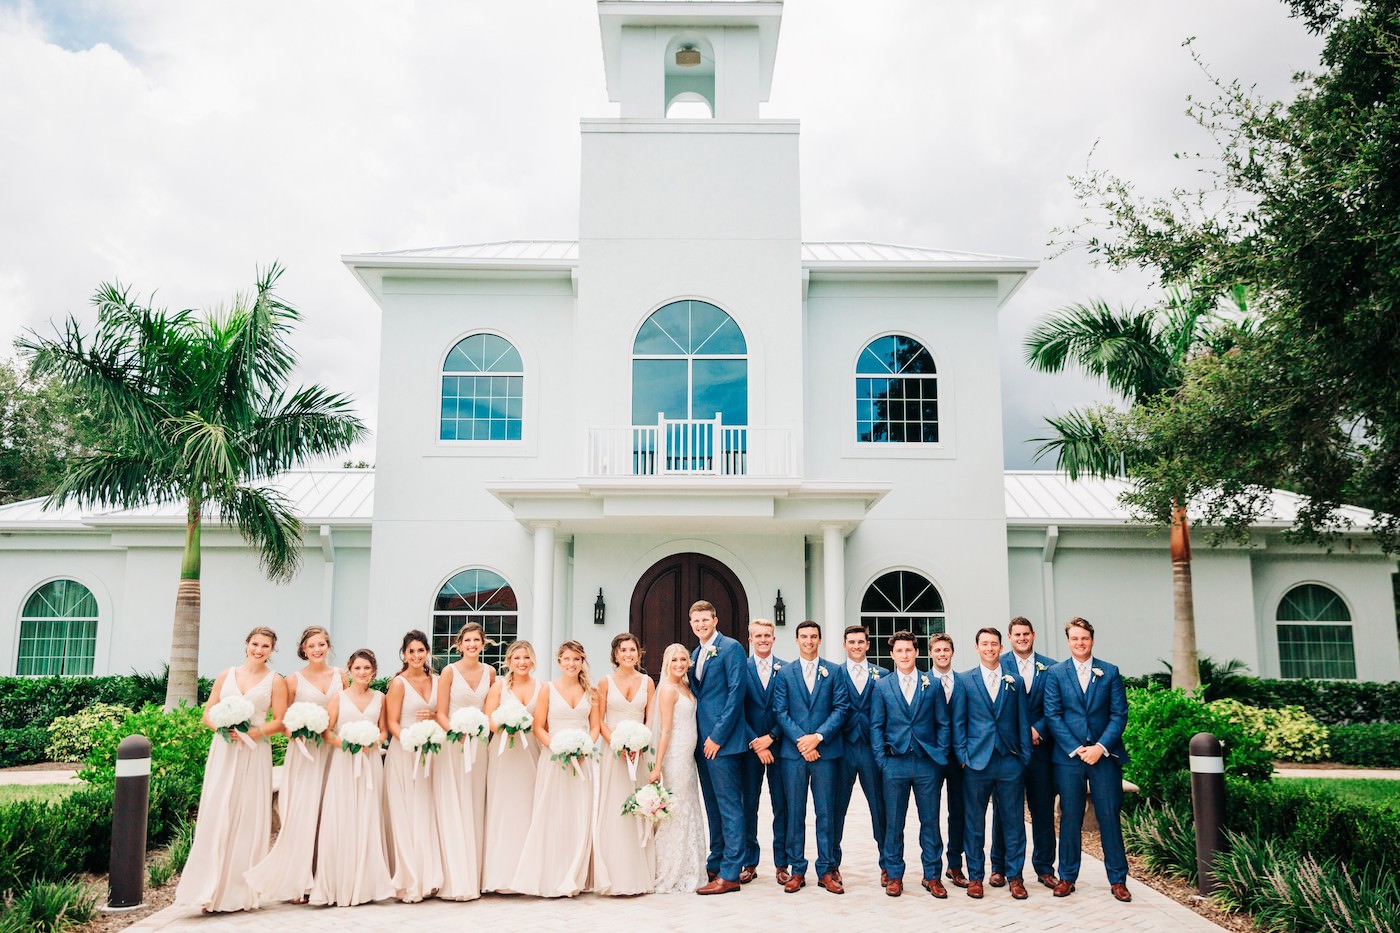 Safety Harbor Wedding Venue Harborside Chapel | Outdoor Wedding Party Portrait at Church Ceremony | Neutral Nude Champagne Watters Bridesmaid Dresses from Bella Bridesmaid | White Hydrangea Bouquets with Cascading Ribbon | Groom and Groomsmen in Navy Blue Suits with Nude Pink Neck Ties